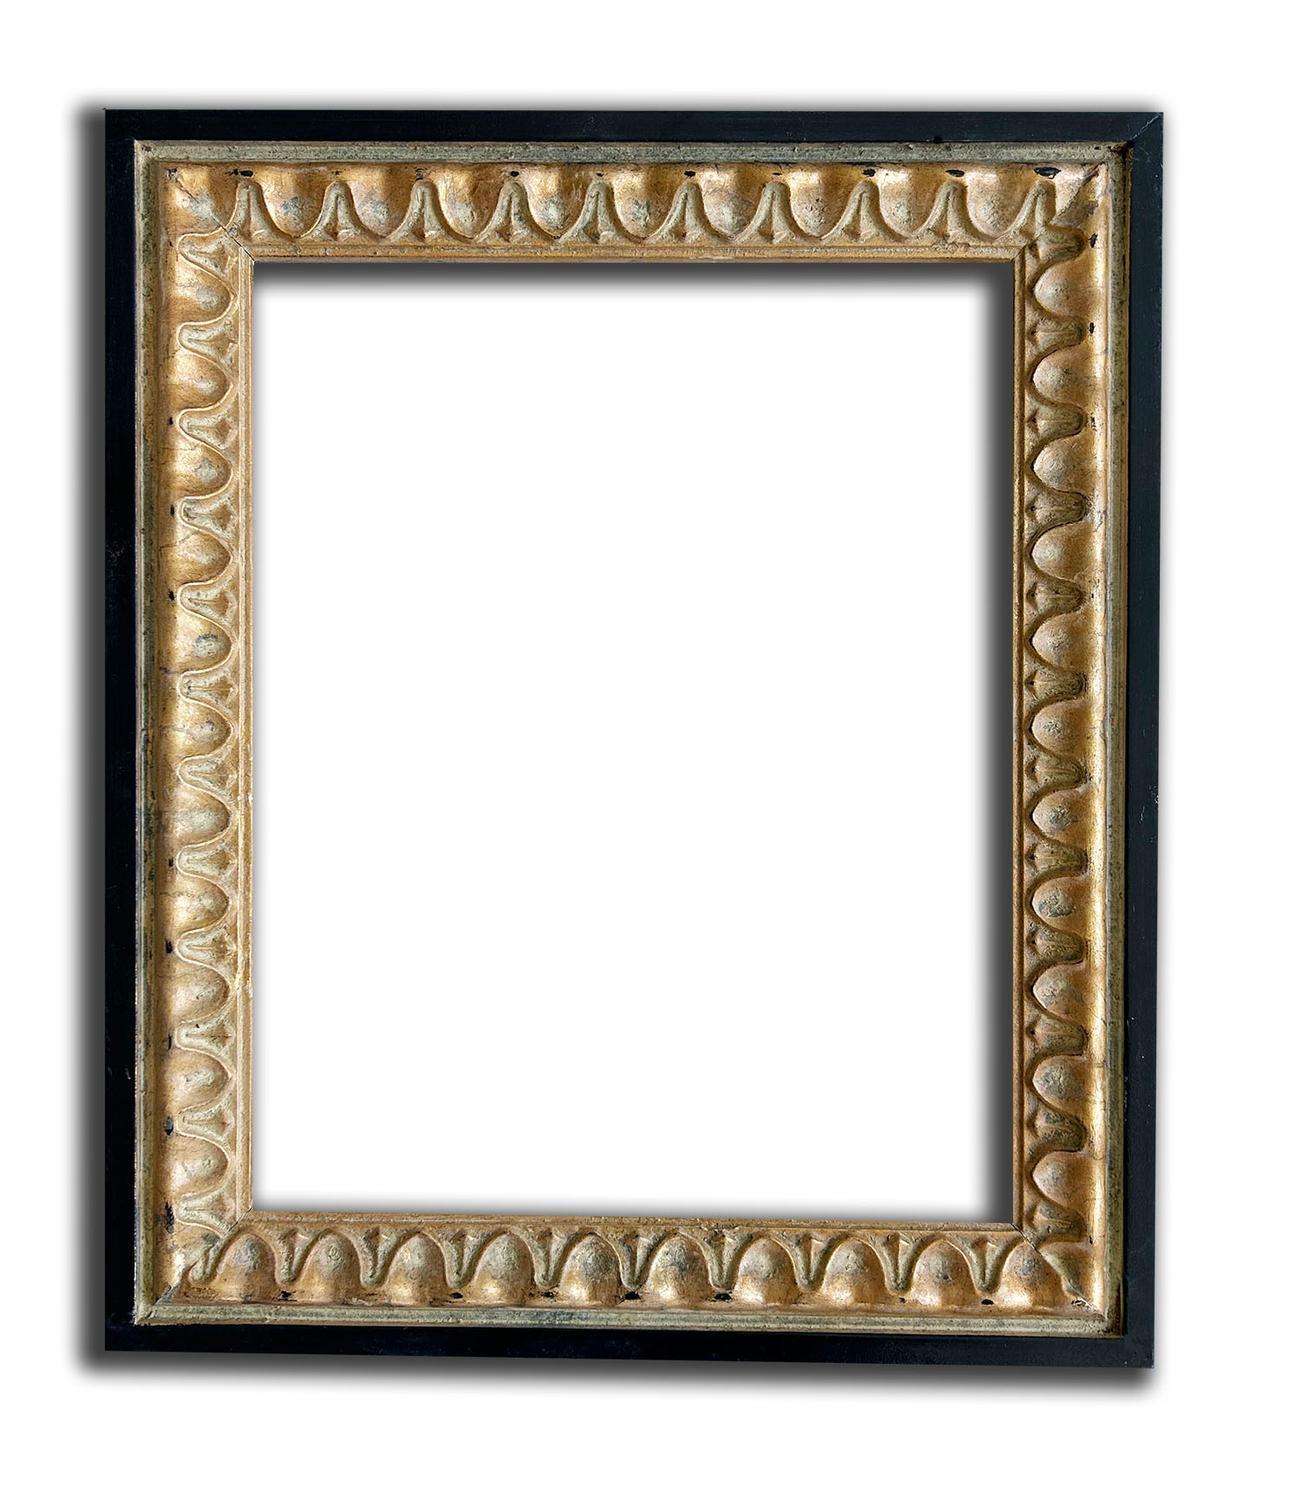 10x15 cm or 4x6 ins, wooden photo frame